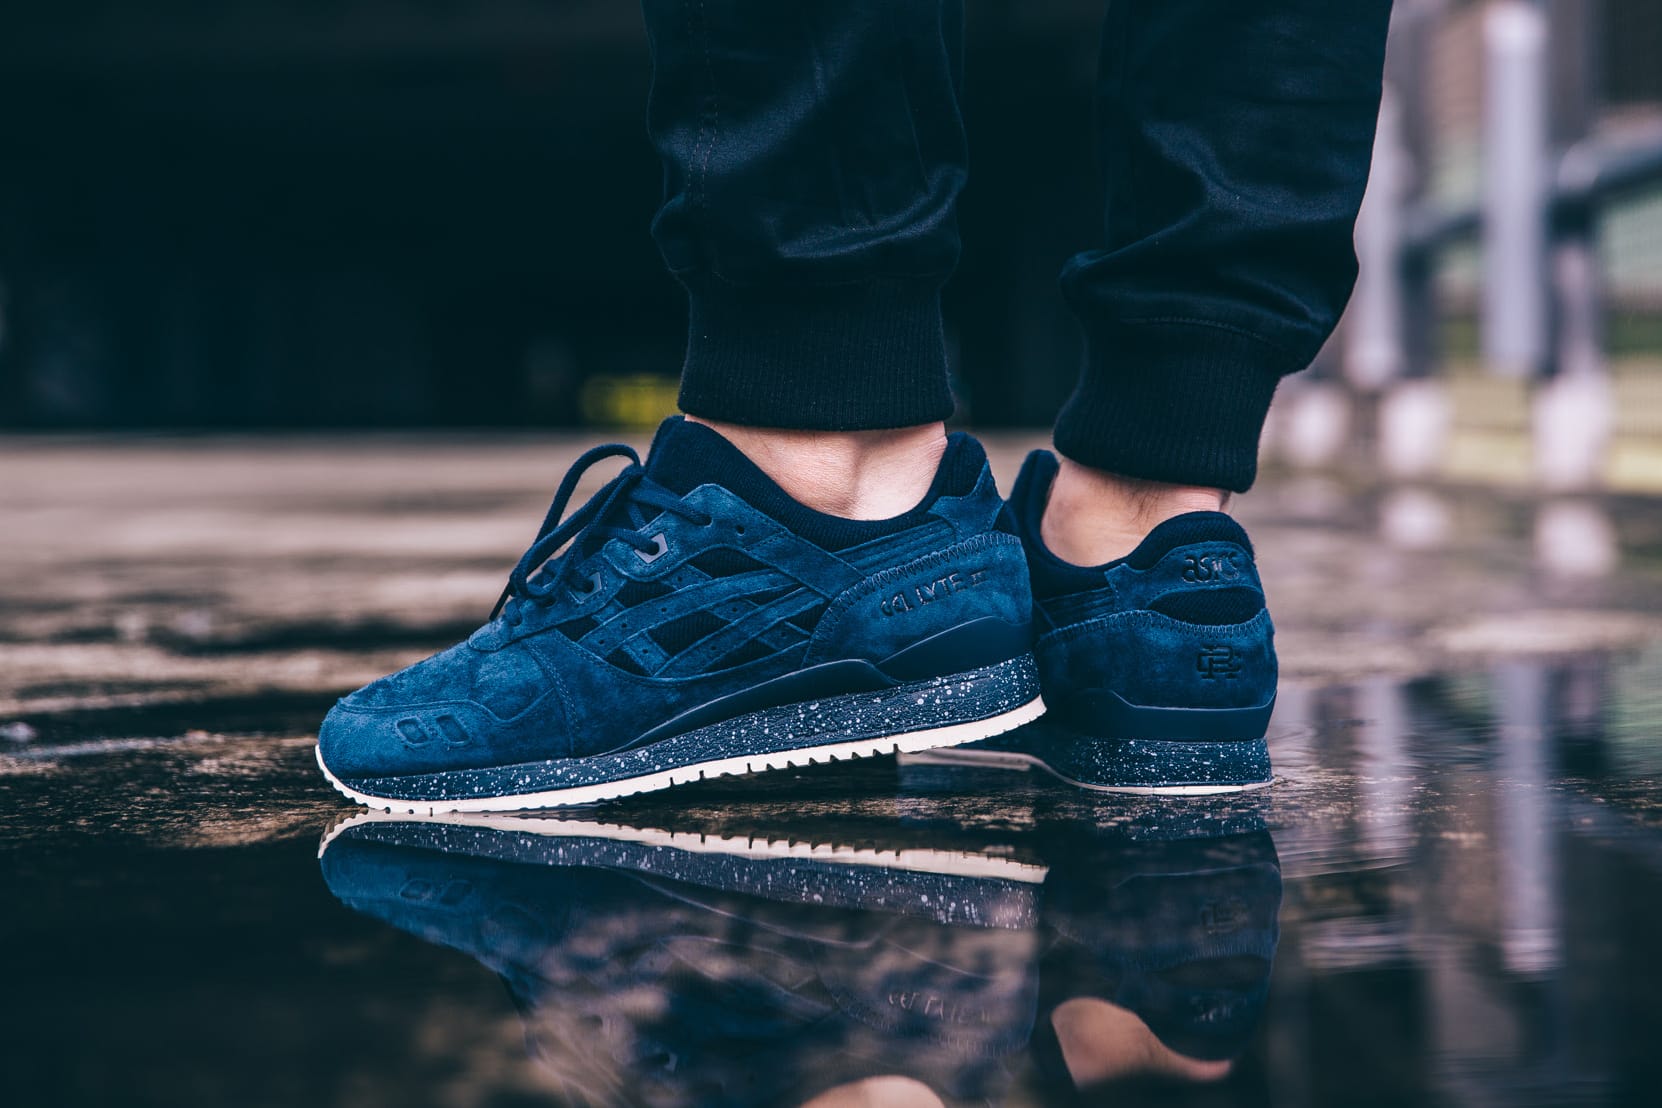 A Closer Look at the ASICS x Reigning Champ GEL Lyte III | HYPEBEAST